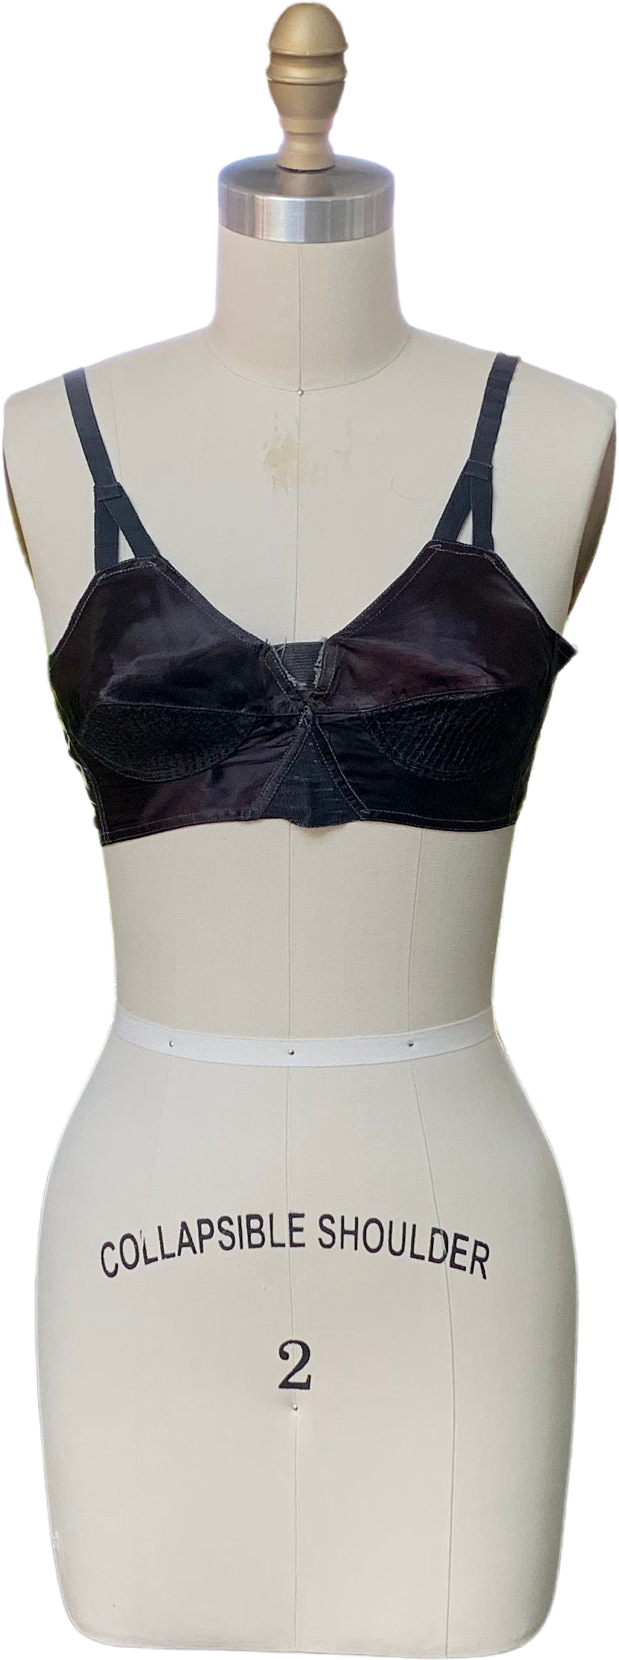 Discover Timeless Elegance with our Black Satin Bullet Bra - What